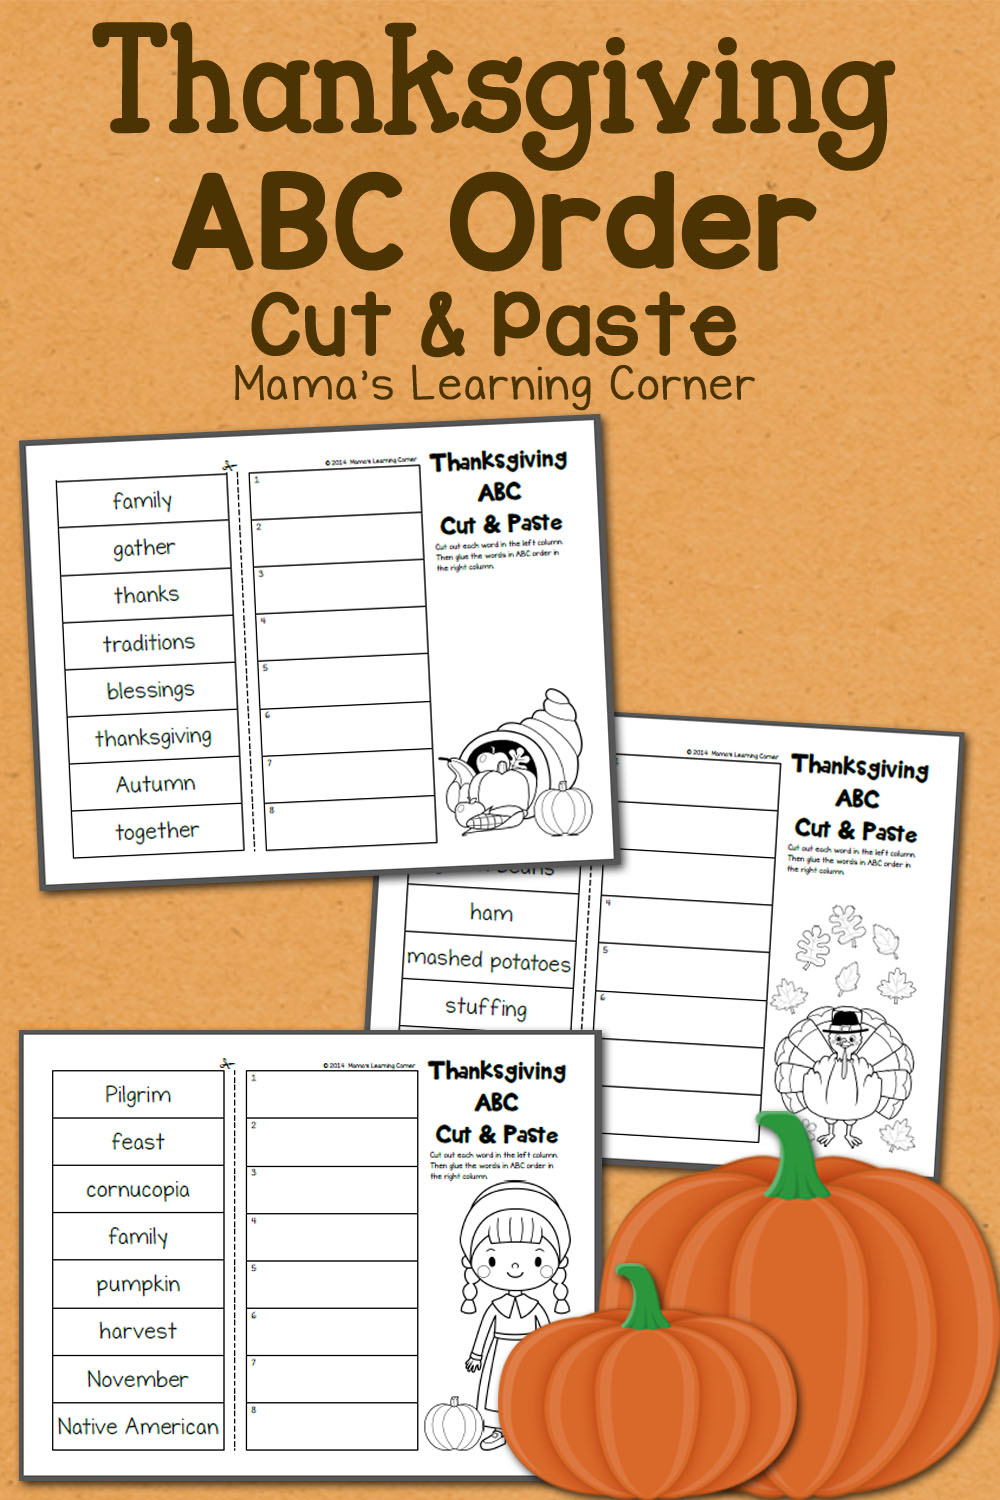 Thanksgiving ABC Order: Cut and Paste Worksheet